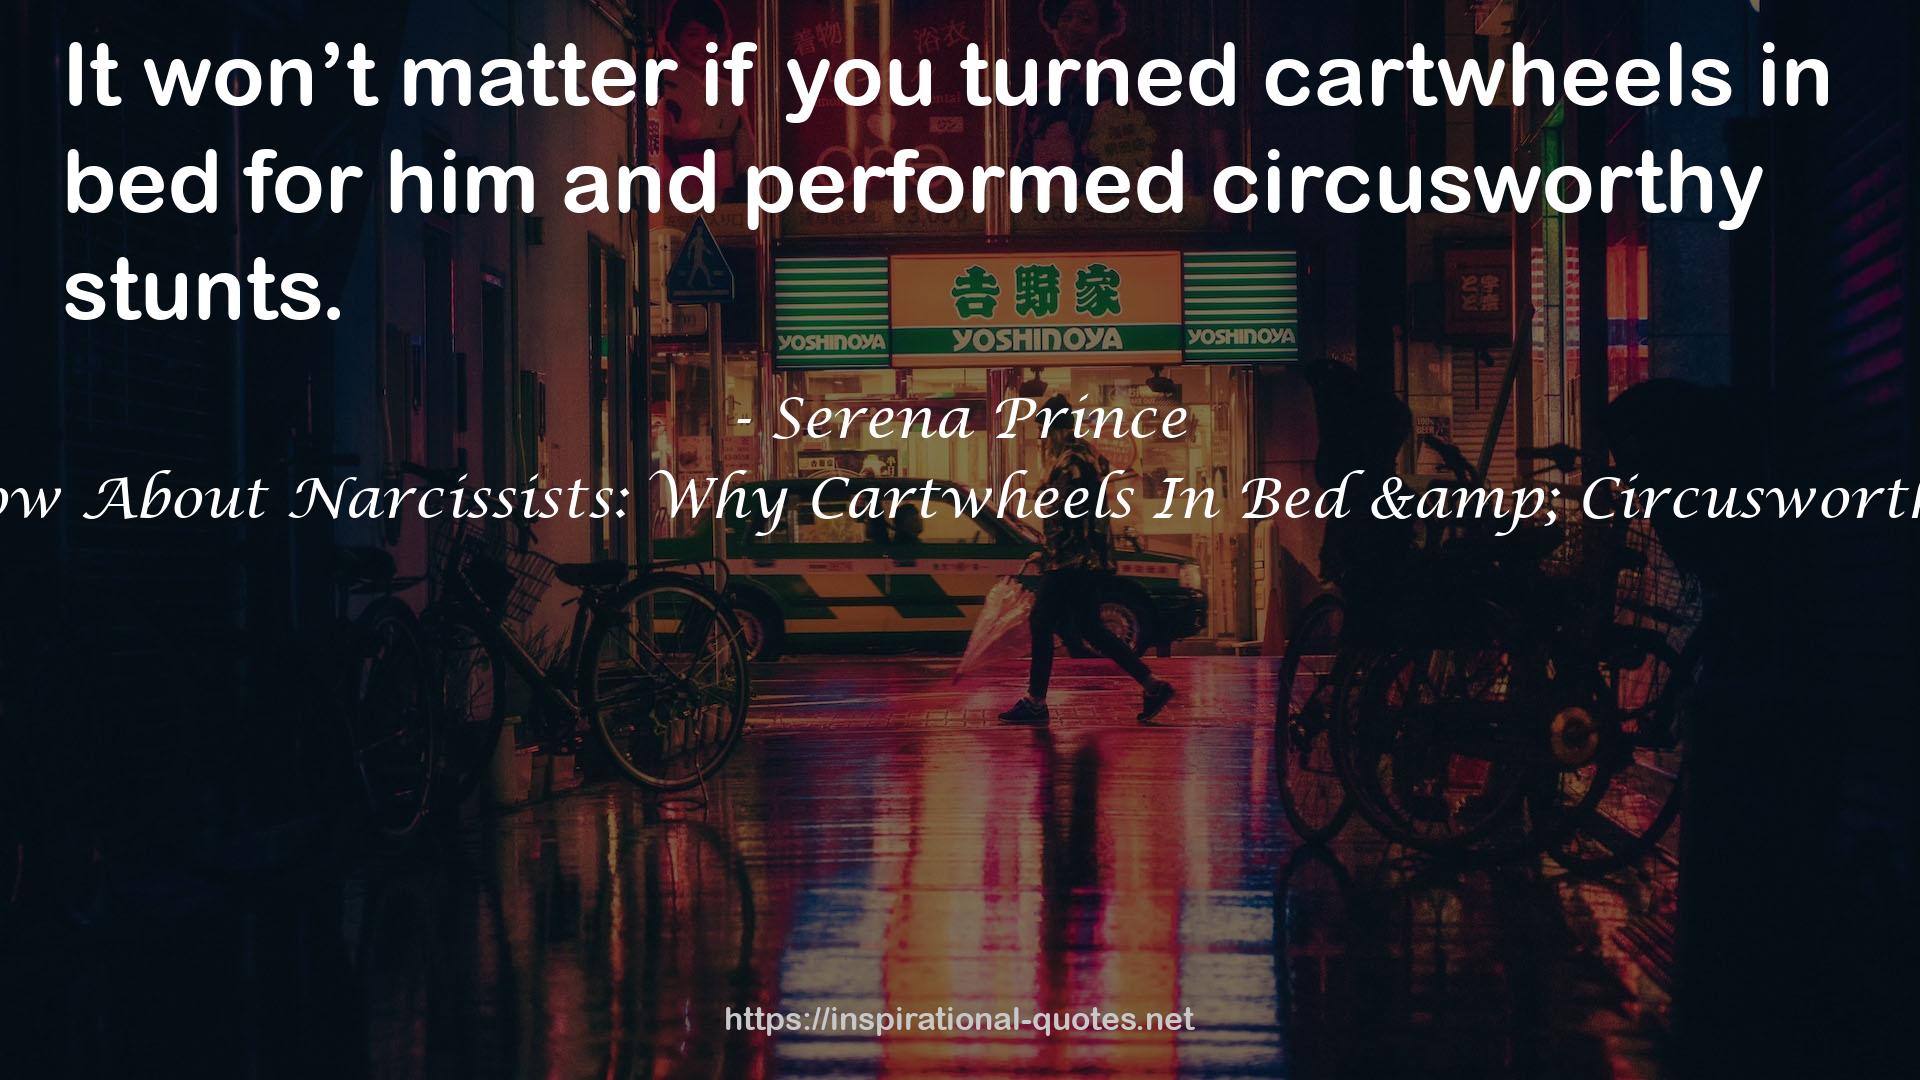 What You Need To Know About Narcissists: Why Cartwheels In Bed & Circusworthy Stunts Won’t Matter QUOTES